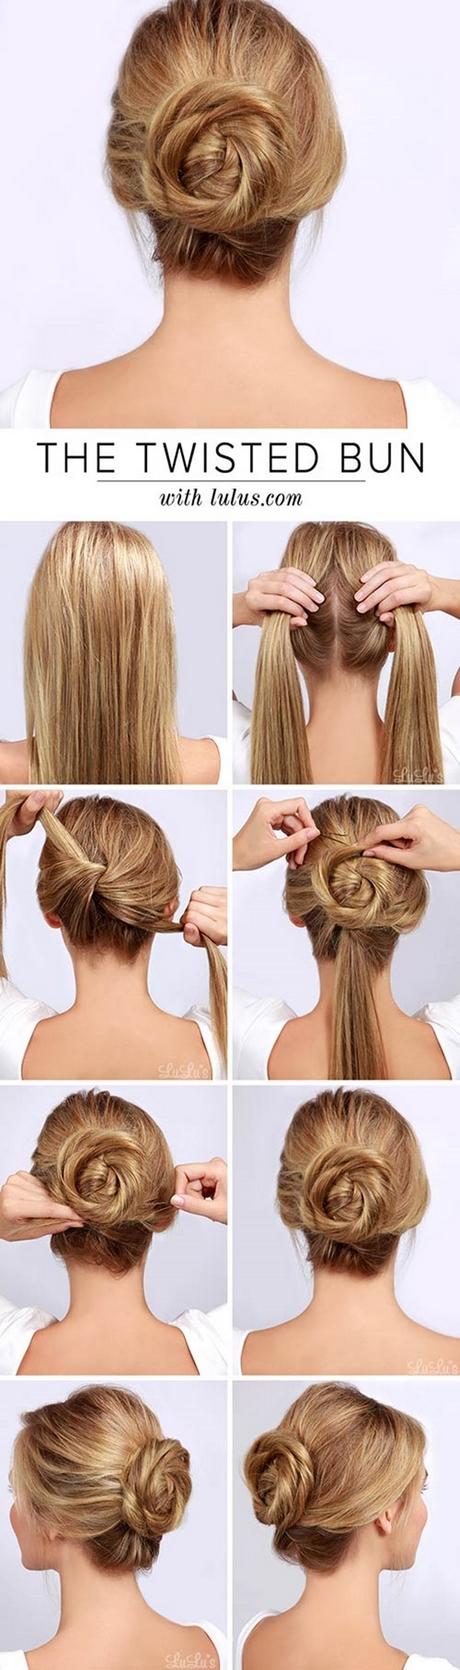 Simple but attractive hairstyles simple-but-attractive-hairstyles-85_10